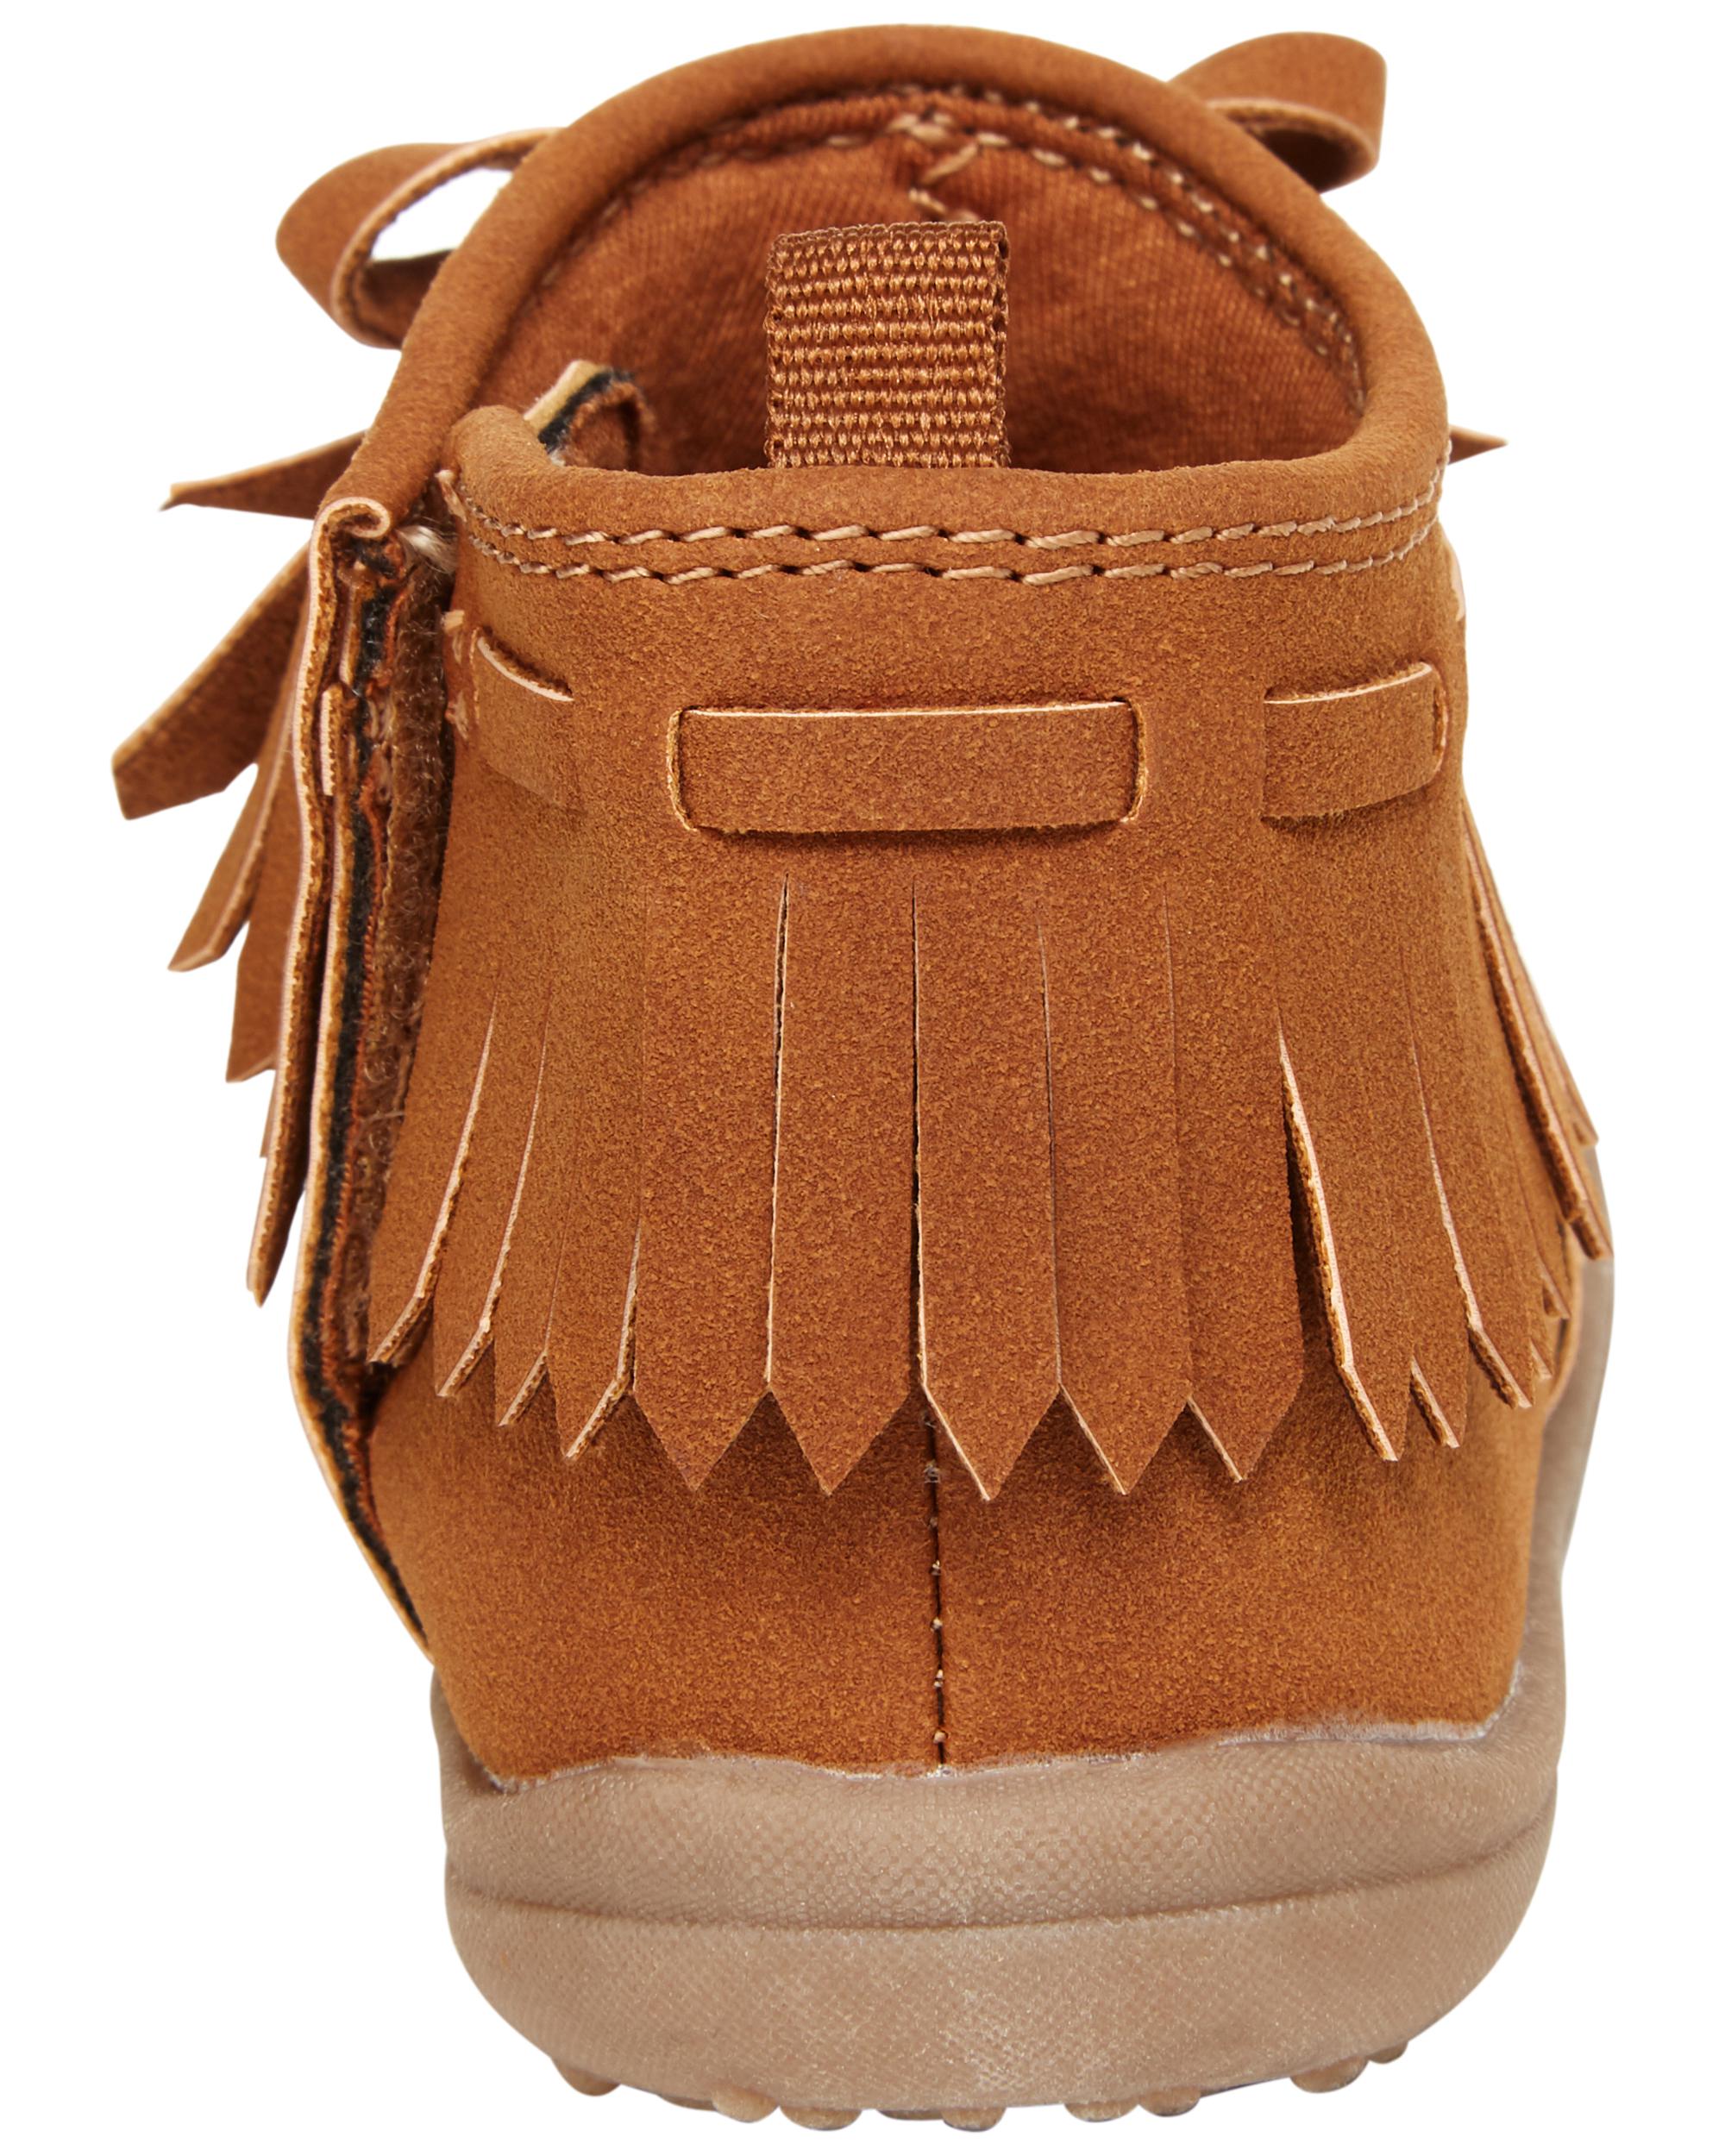 Every Step Fringe Boot